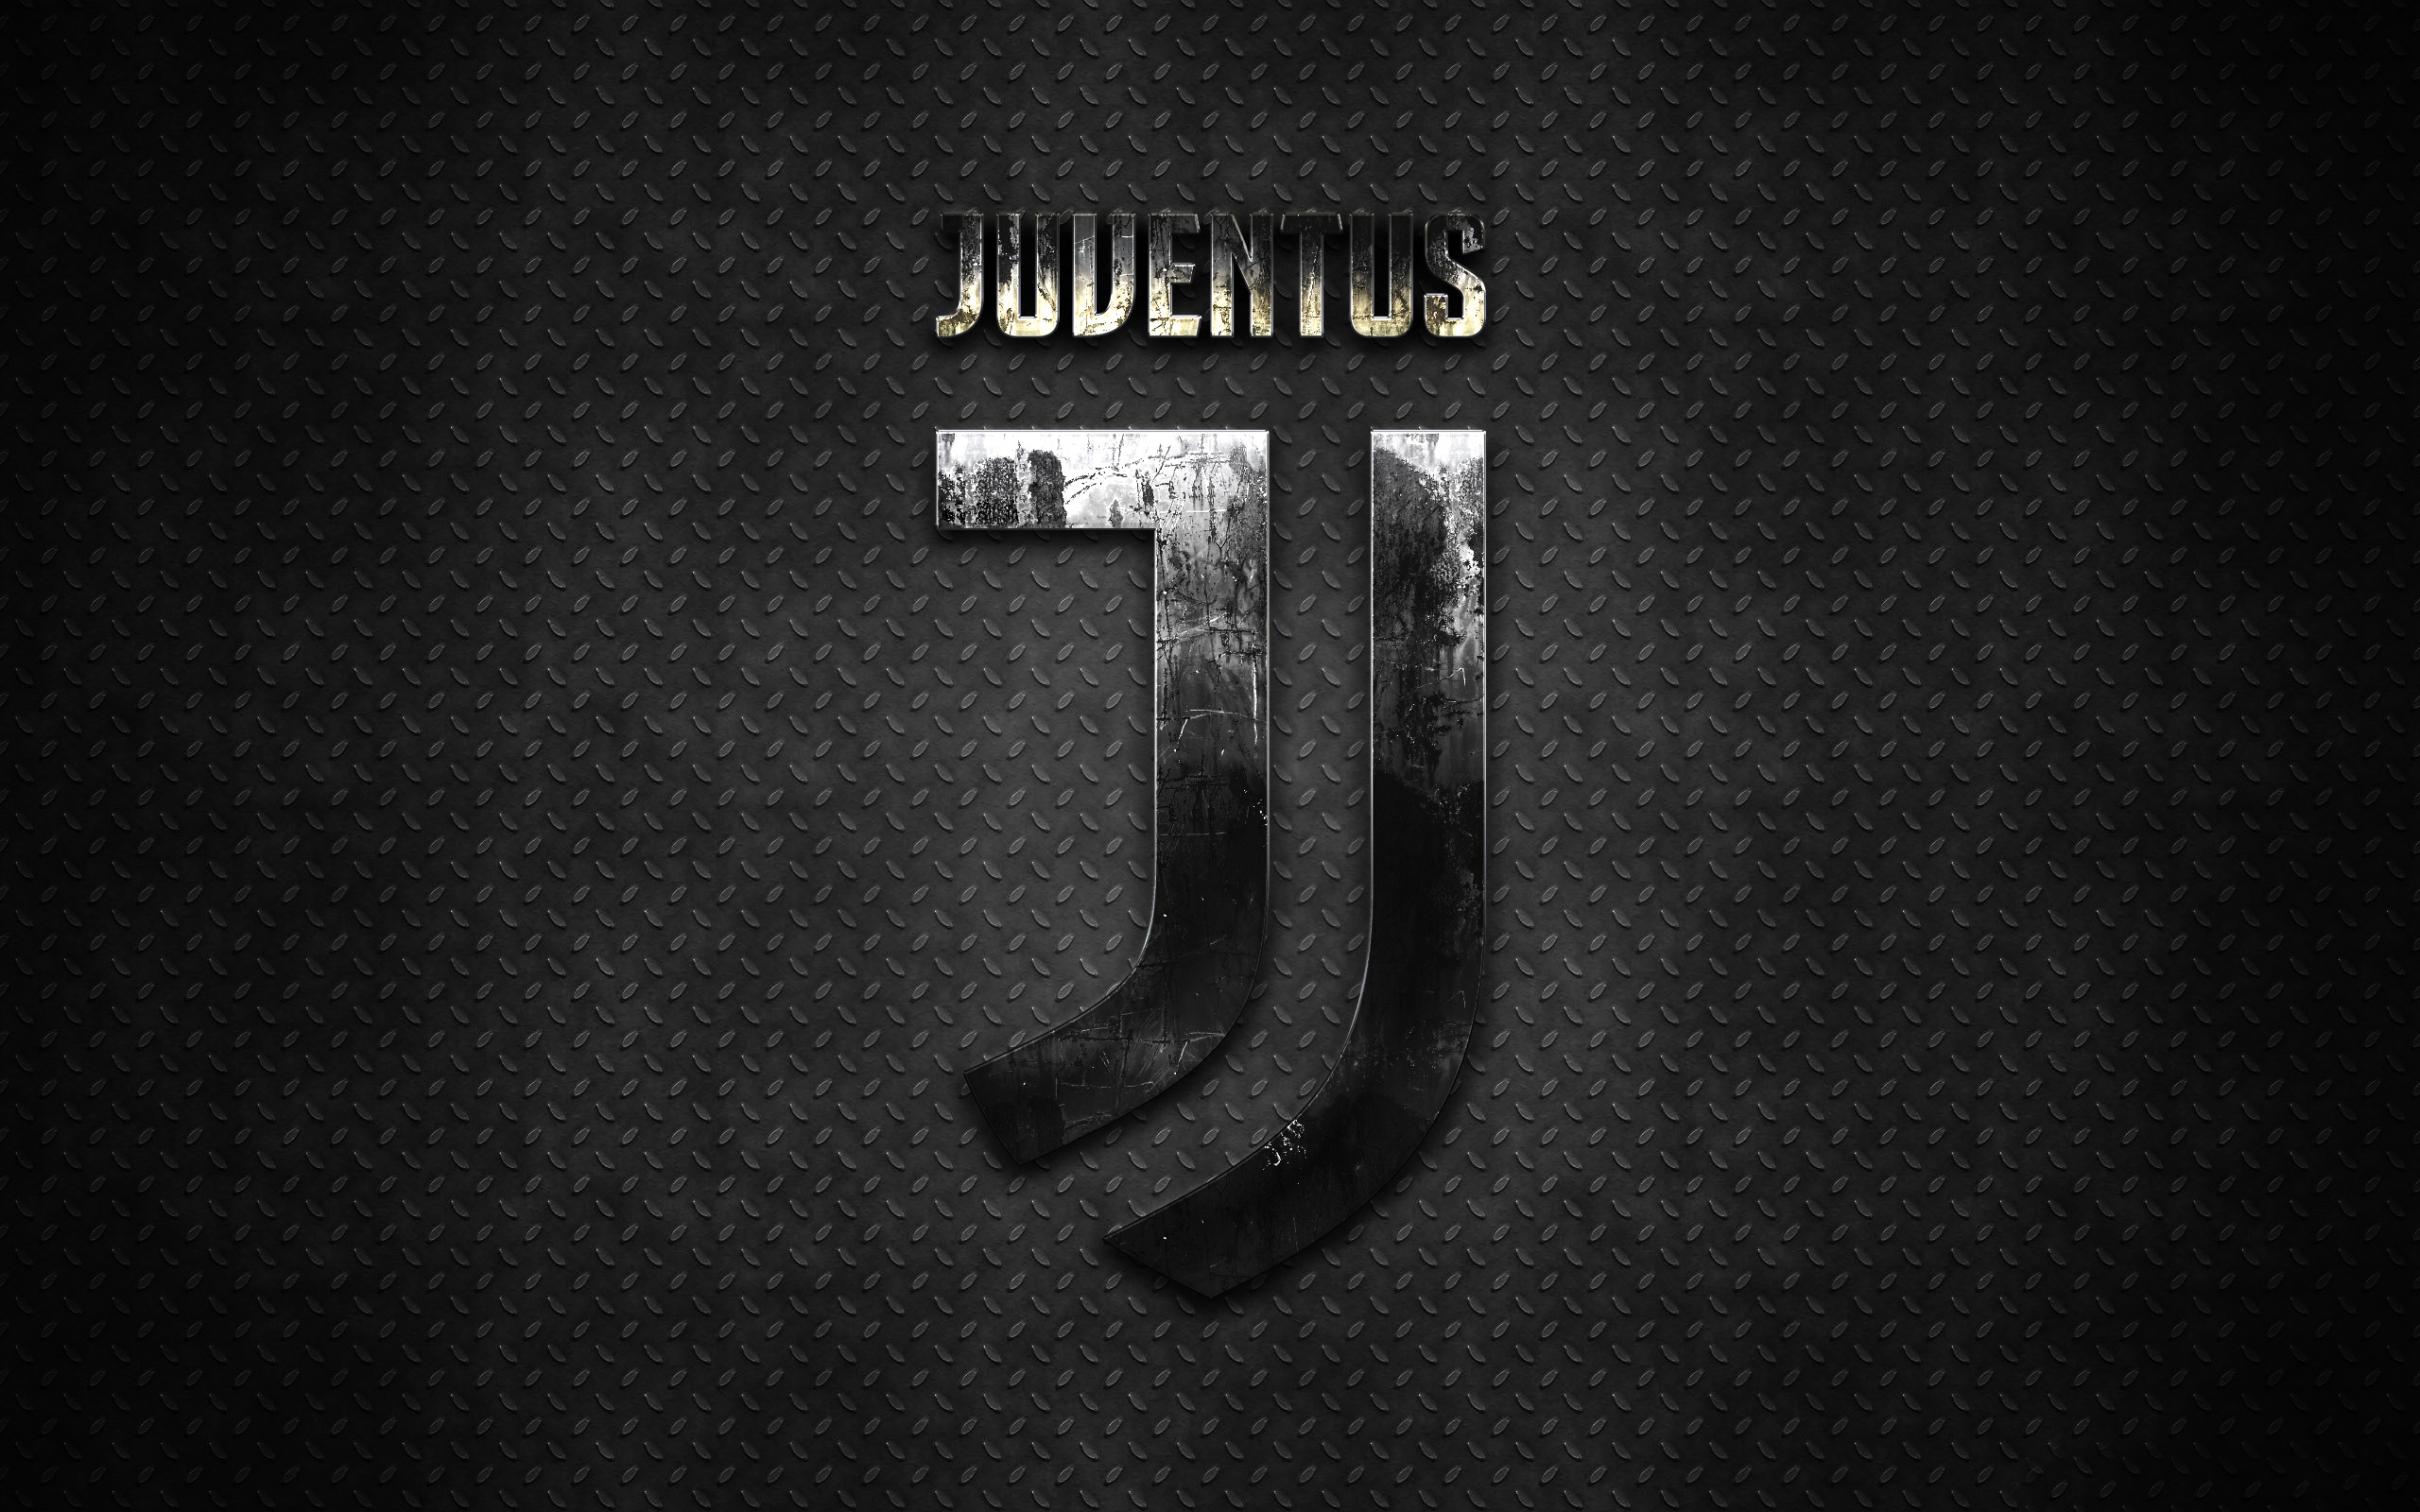 Juventus: The club has worn a black and white striped home kit since 1903. 2560x1600 HD Wallpaper.